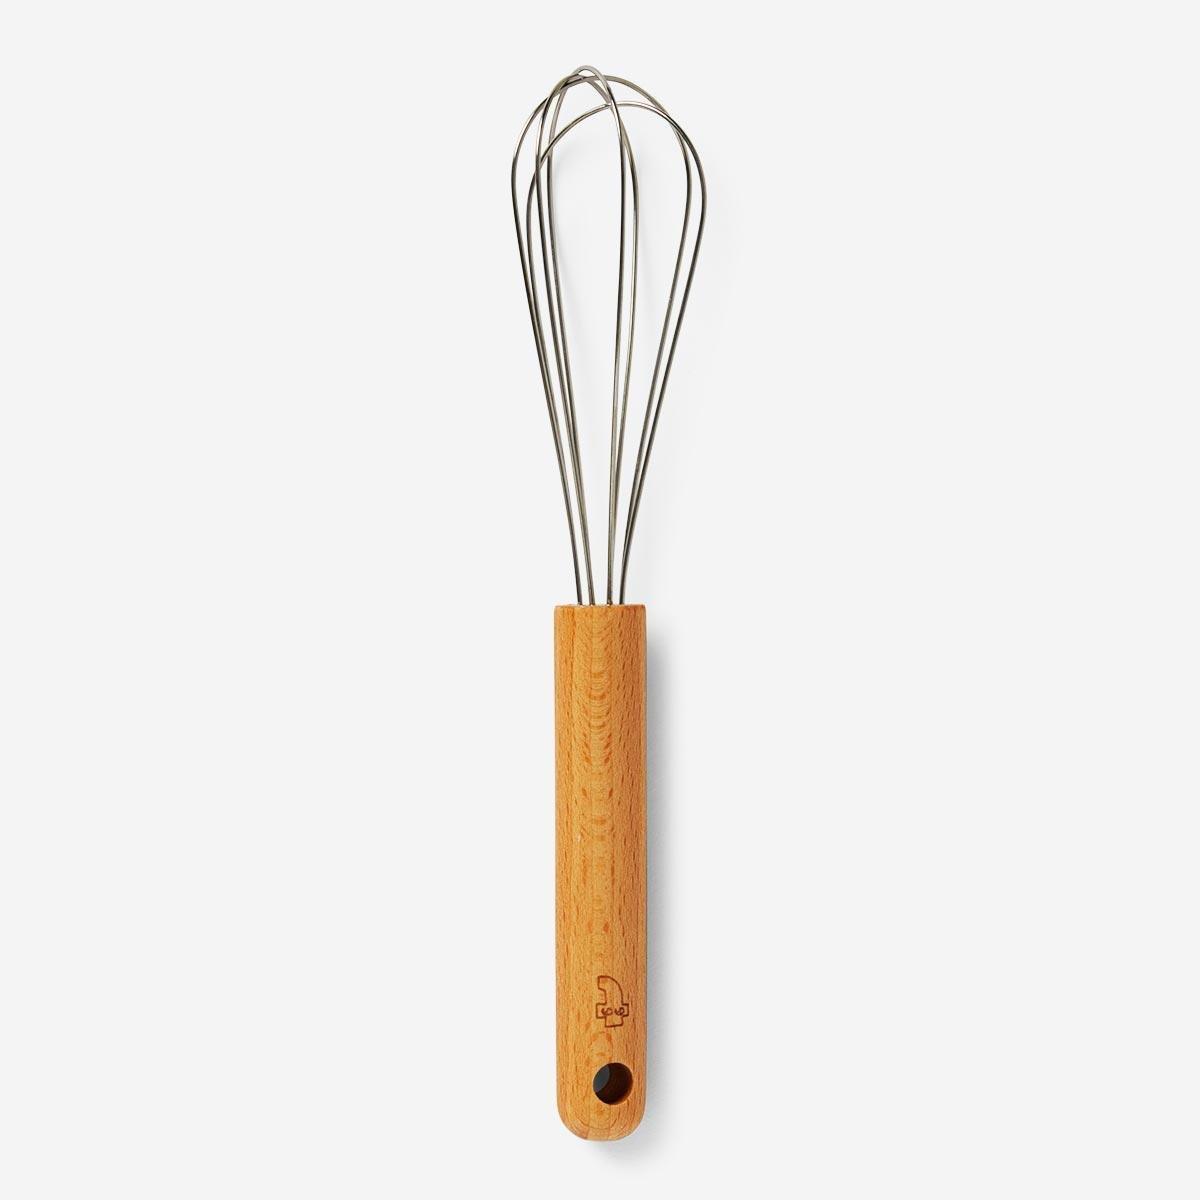 Stainless steel hand whisk